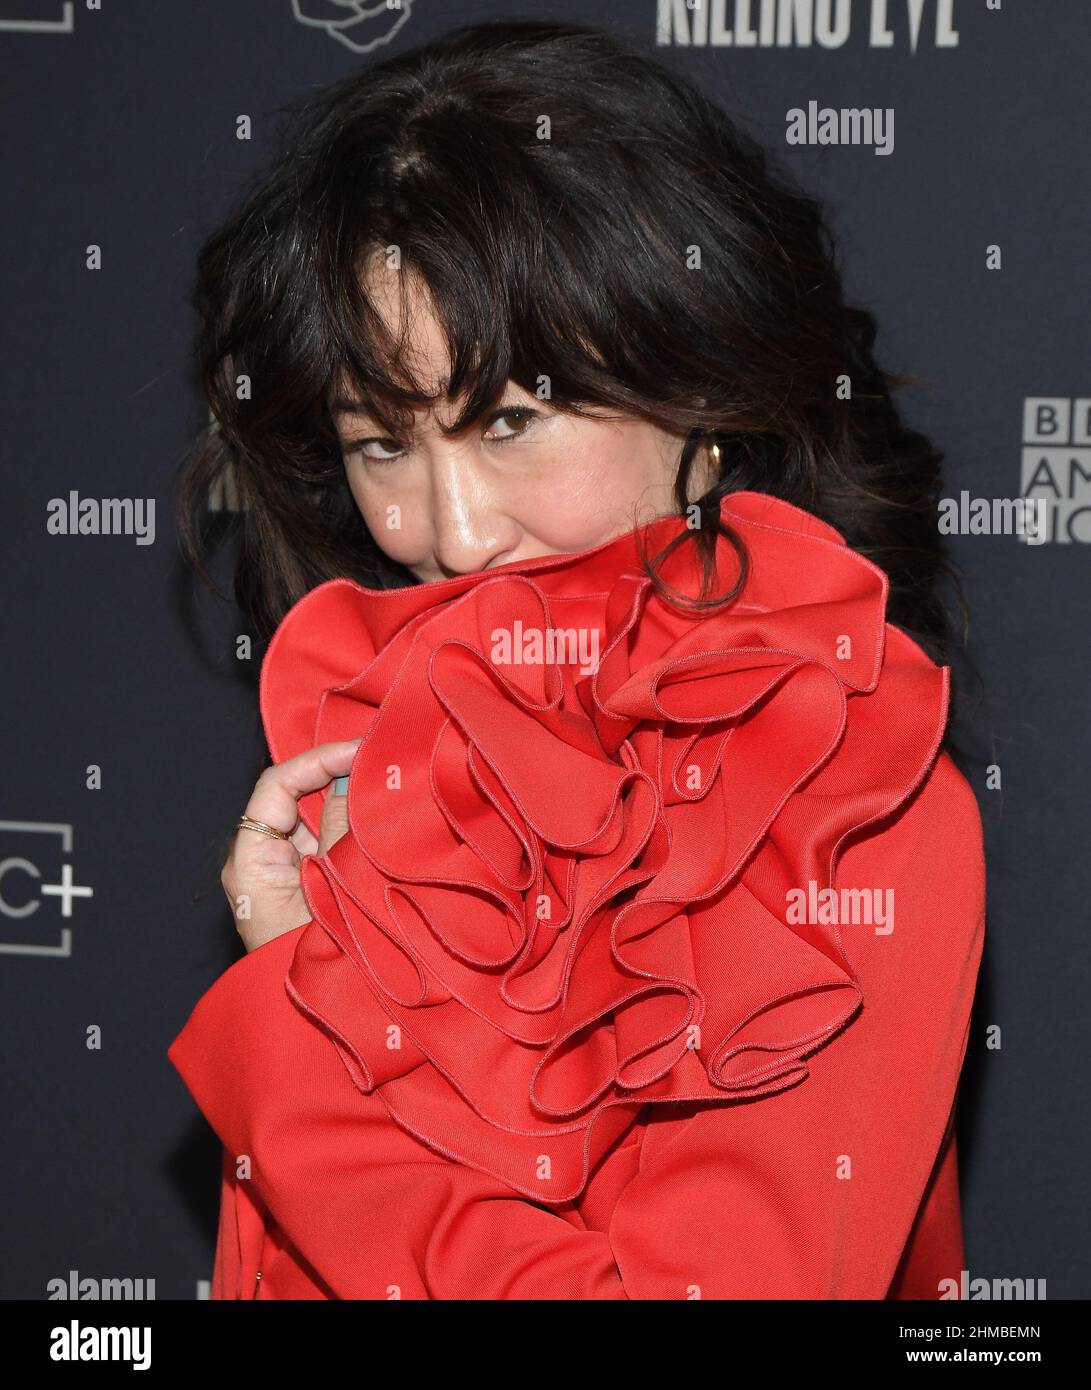 Los Angeles, USA. 08th Feb, 2022. Sandra Oh at the BBC's KILLING EVE Season Four Photo Call held at The Peninsula Beverly Hills in Beverly Hills, CA on Tuesday, ?February 8, 2022. (Photo By Sthanlee B. Mirador/Sipa USA) Credit: Sipa USA/Alamy Live News Stock Photo